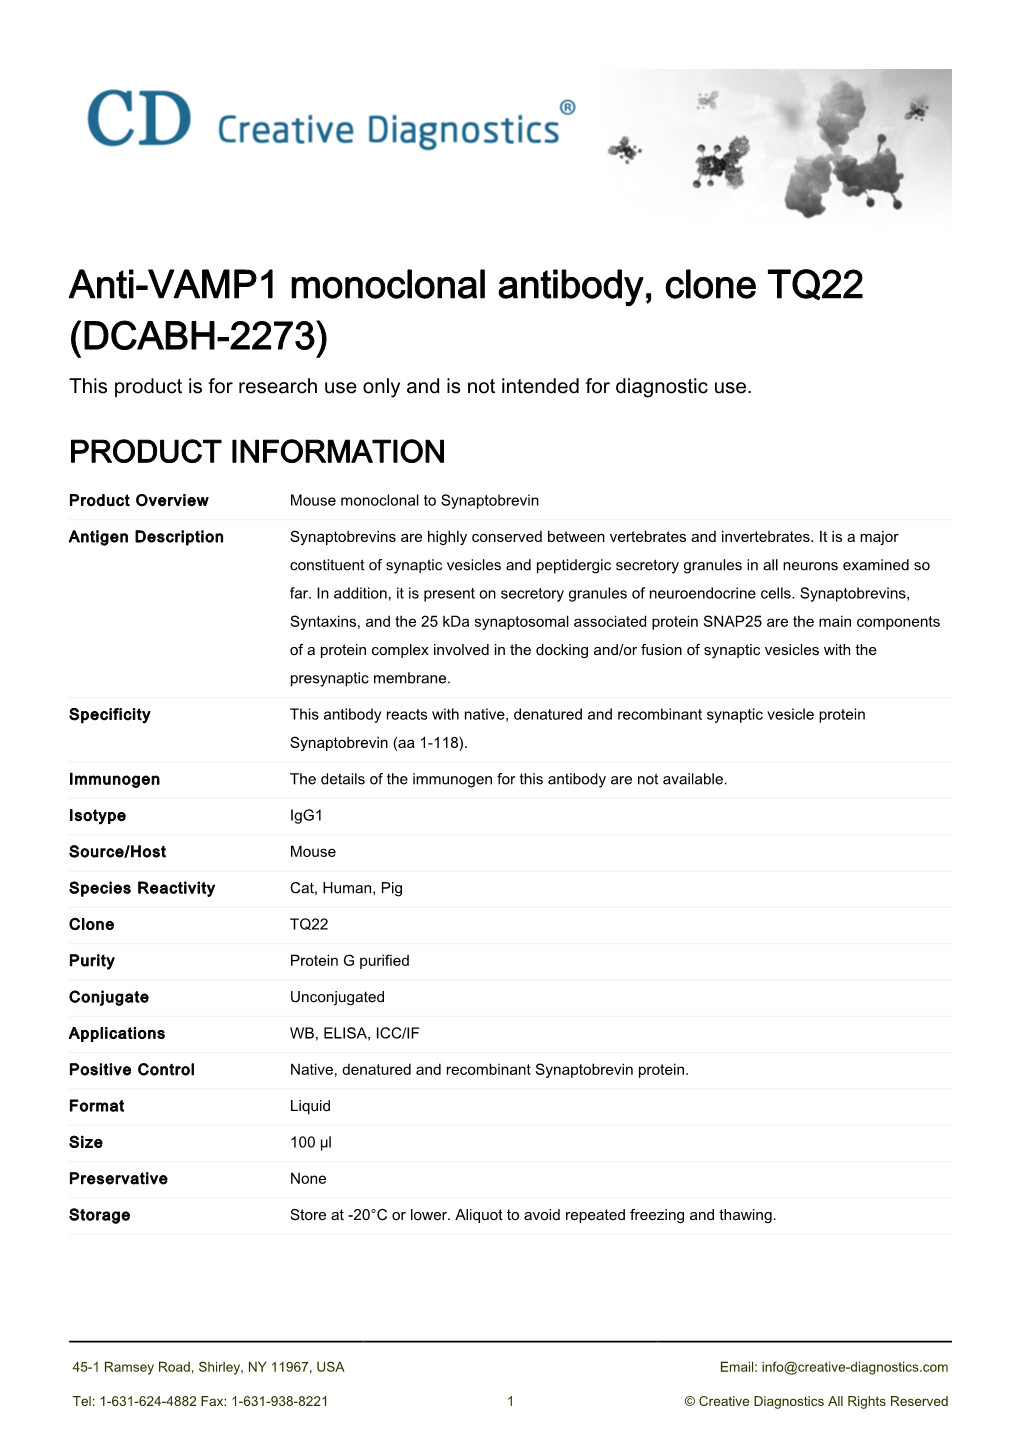 Anti-VAMP1 Monoclonal Antibody, Clone TQ22 (DCABH-2273) This Product Is for Research Use Only and Is Not Intended for Diagnostic Use